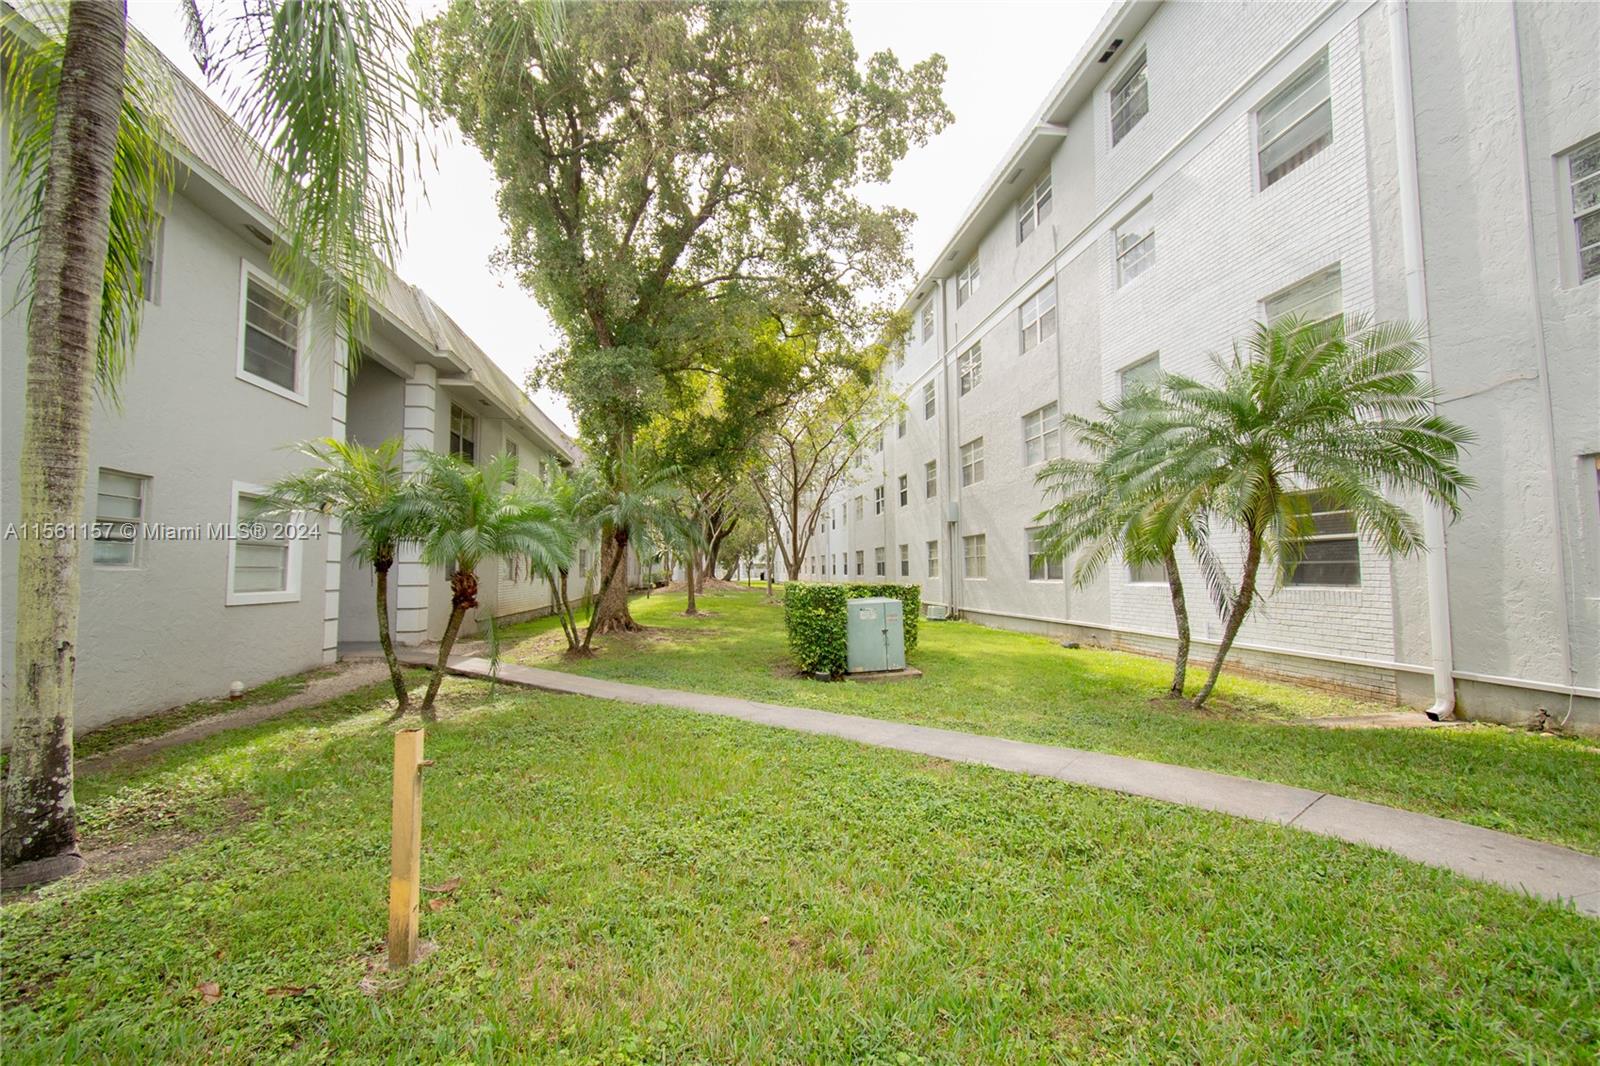 Great investment opportunity and a starter home in this well-kept community of Village Homes and Condos at Palmetto Bay. This updated Condo offers 1 bedroom,1 full bathroom, 1 assigned parking space.Great location close to US-1. It won't last! 
ONE BLOCK EAST OF US1 ON SW 174 STREET